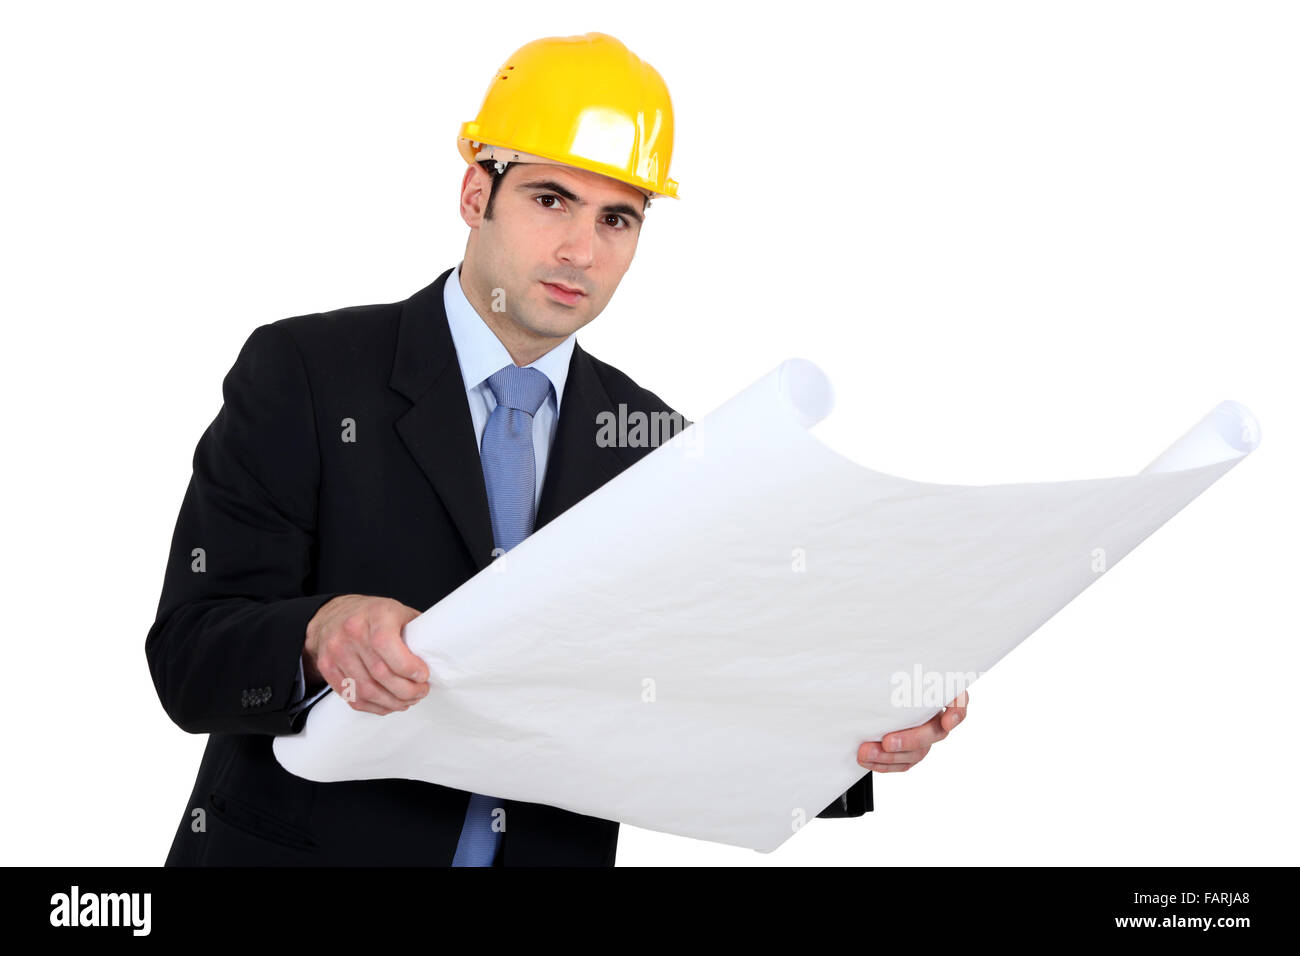 Engineer studying plans Stock Photo